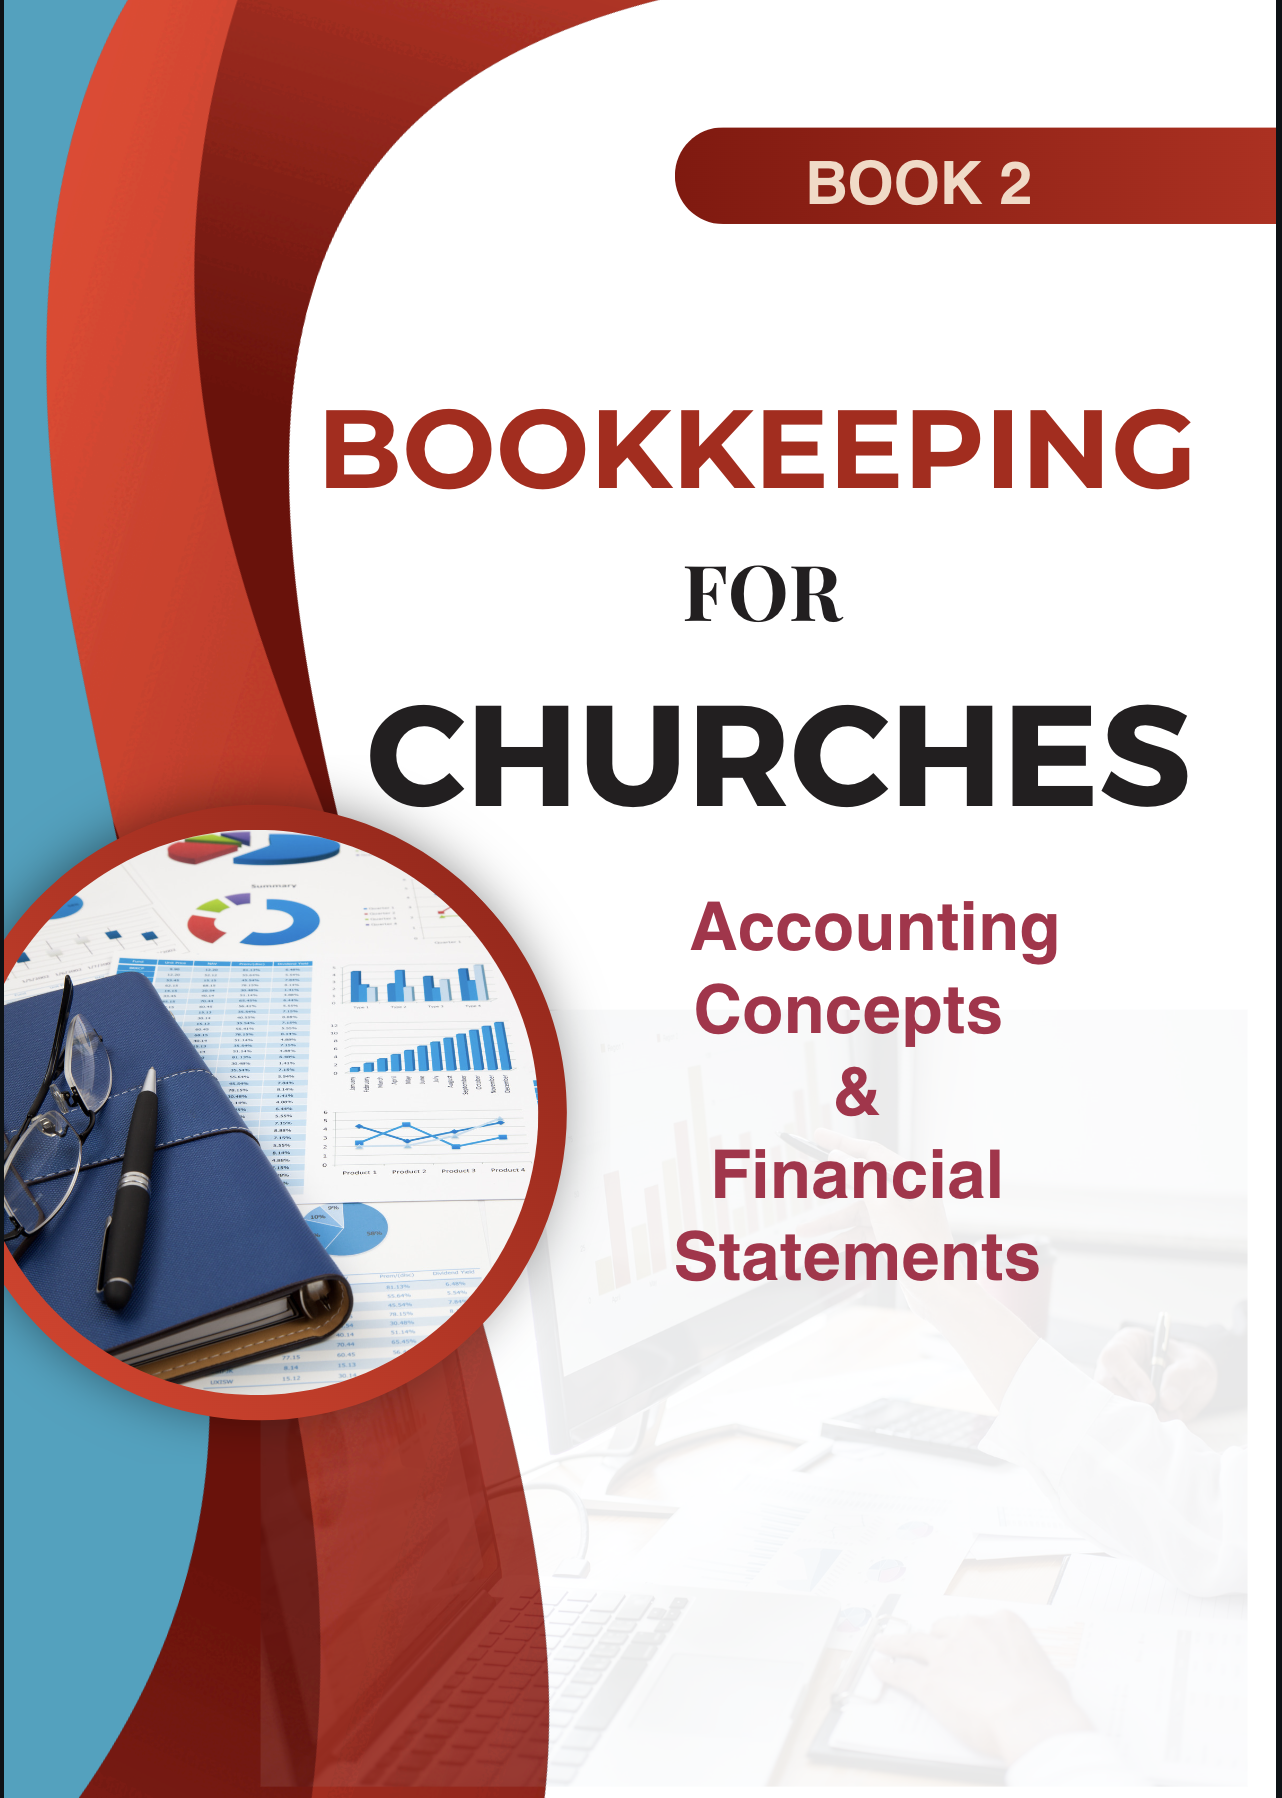 Bookkeeping for Churches Accounting Concepts and Financial Statements